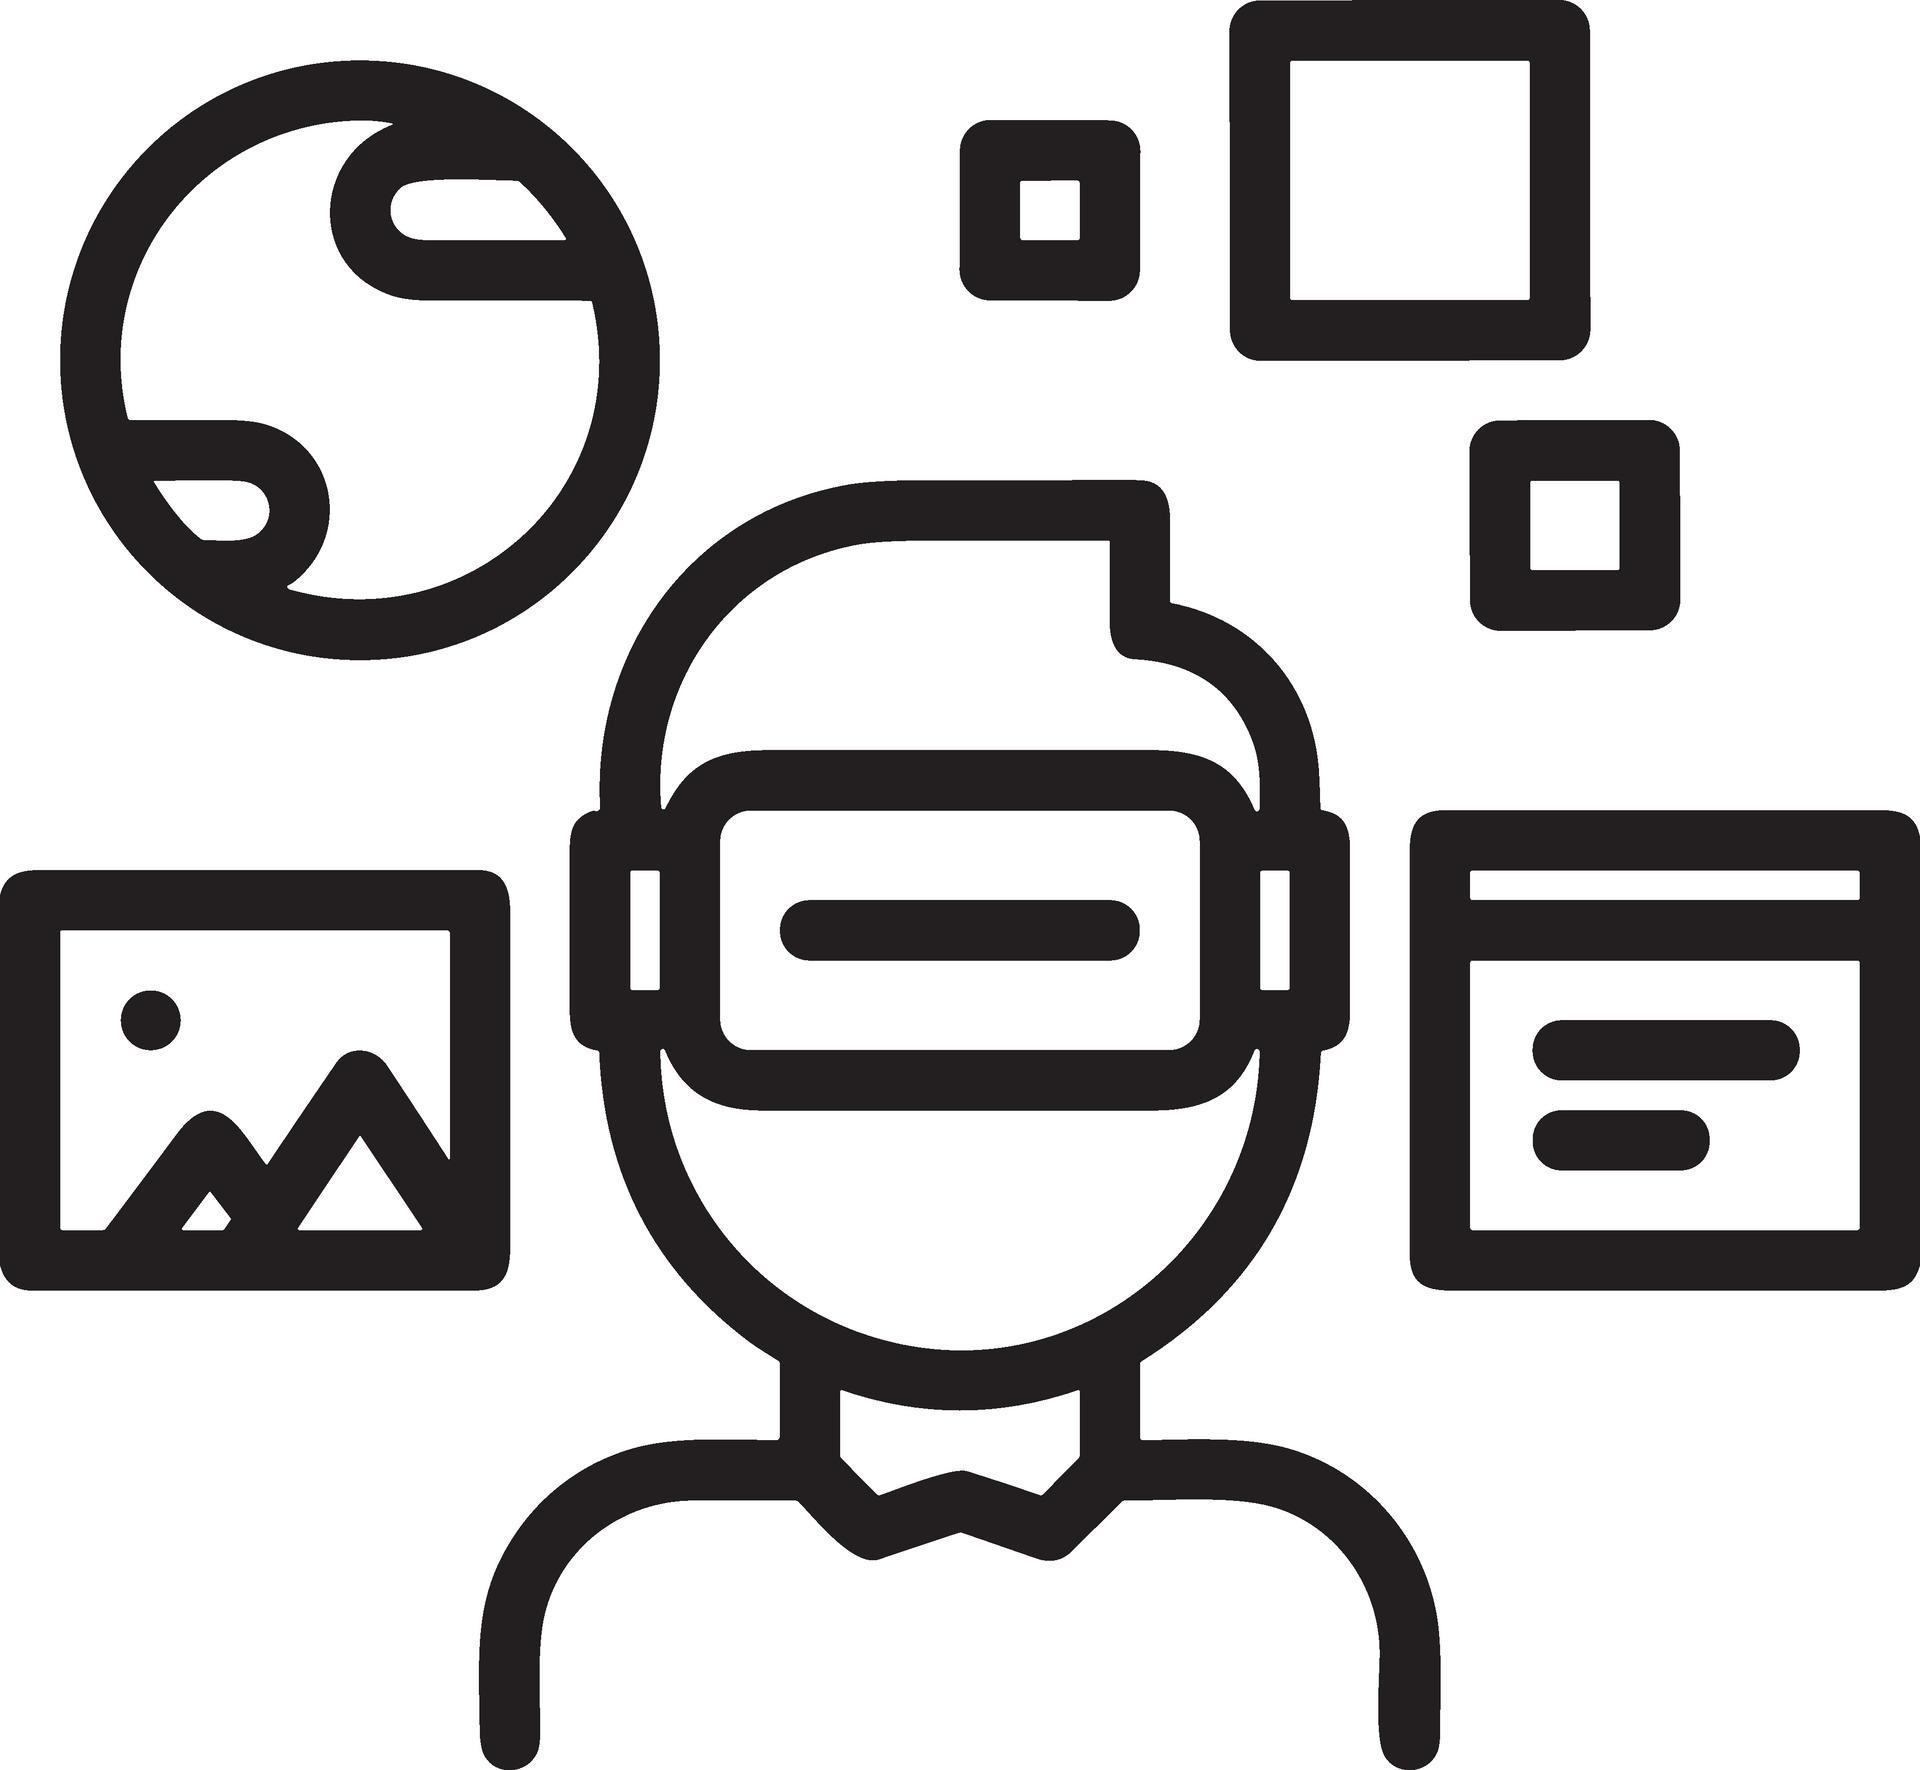 A graphic for interactive and immersive education, which shows a person wearing a virtual reality mask, with other shapes around the person's head.